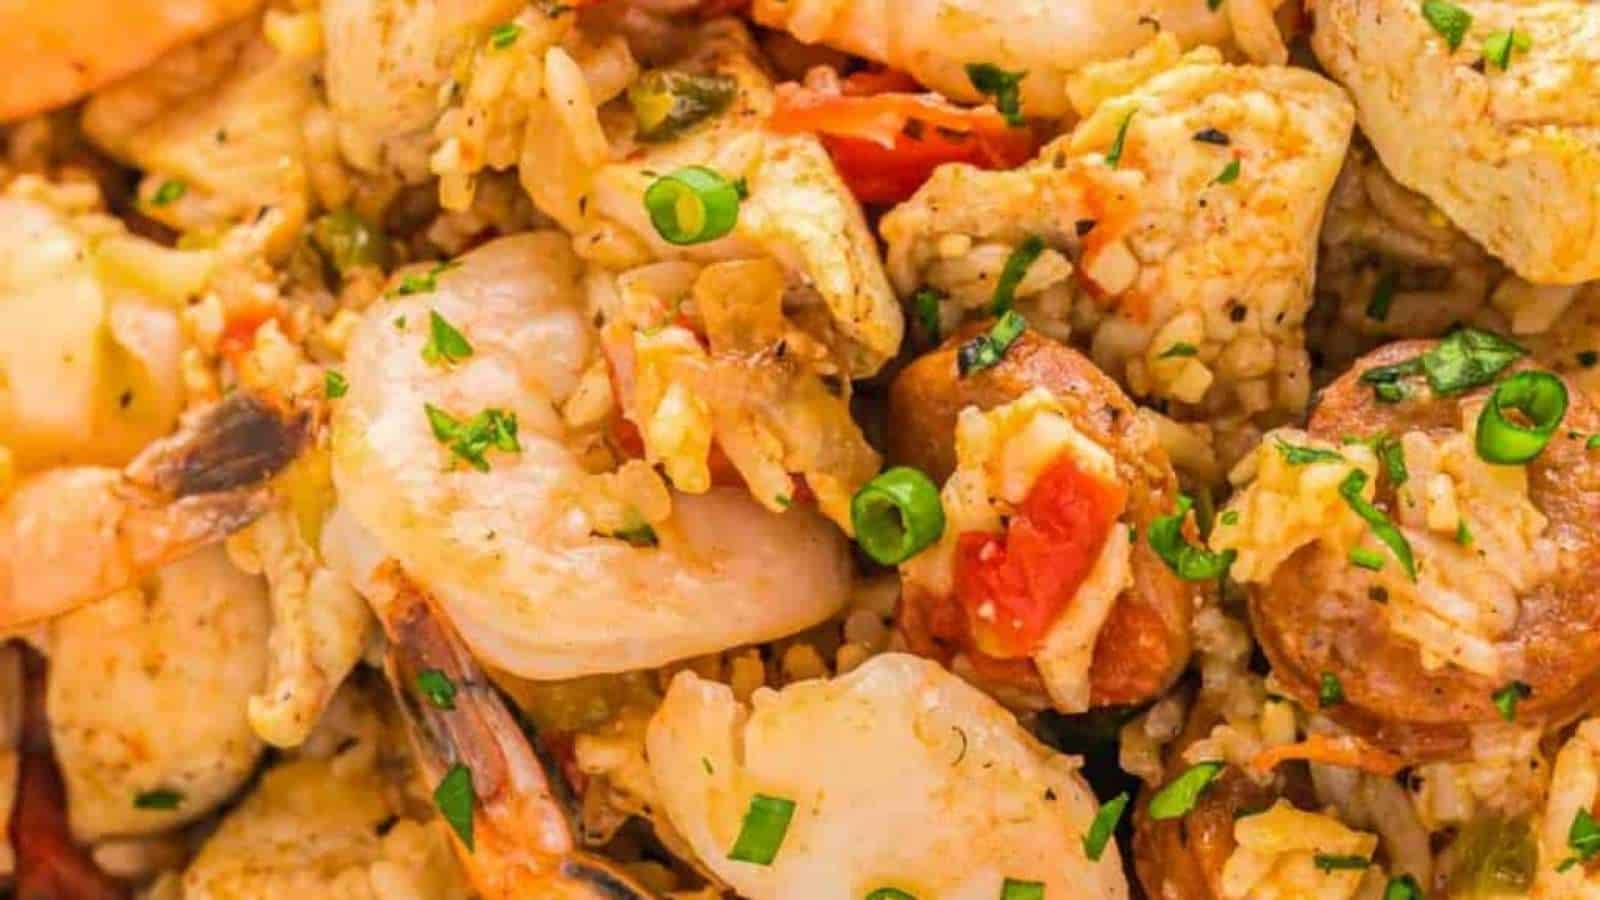 A close up of a dish with shrimp and rice.